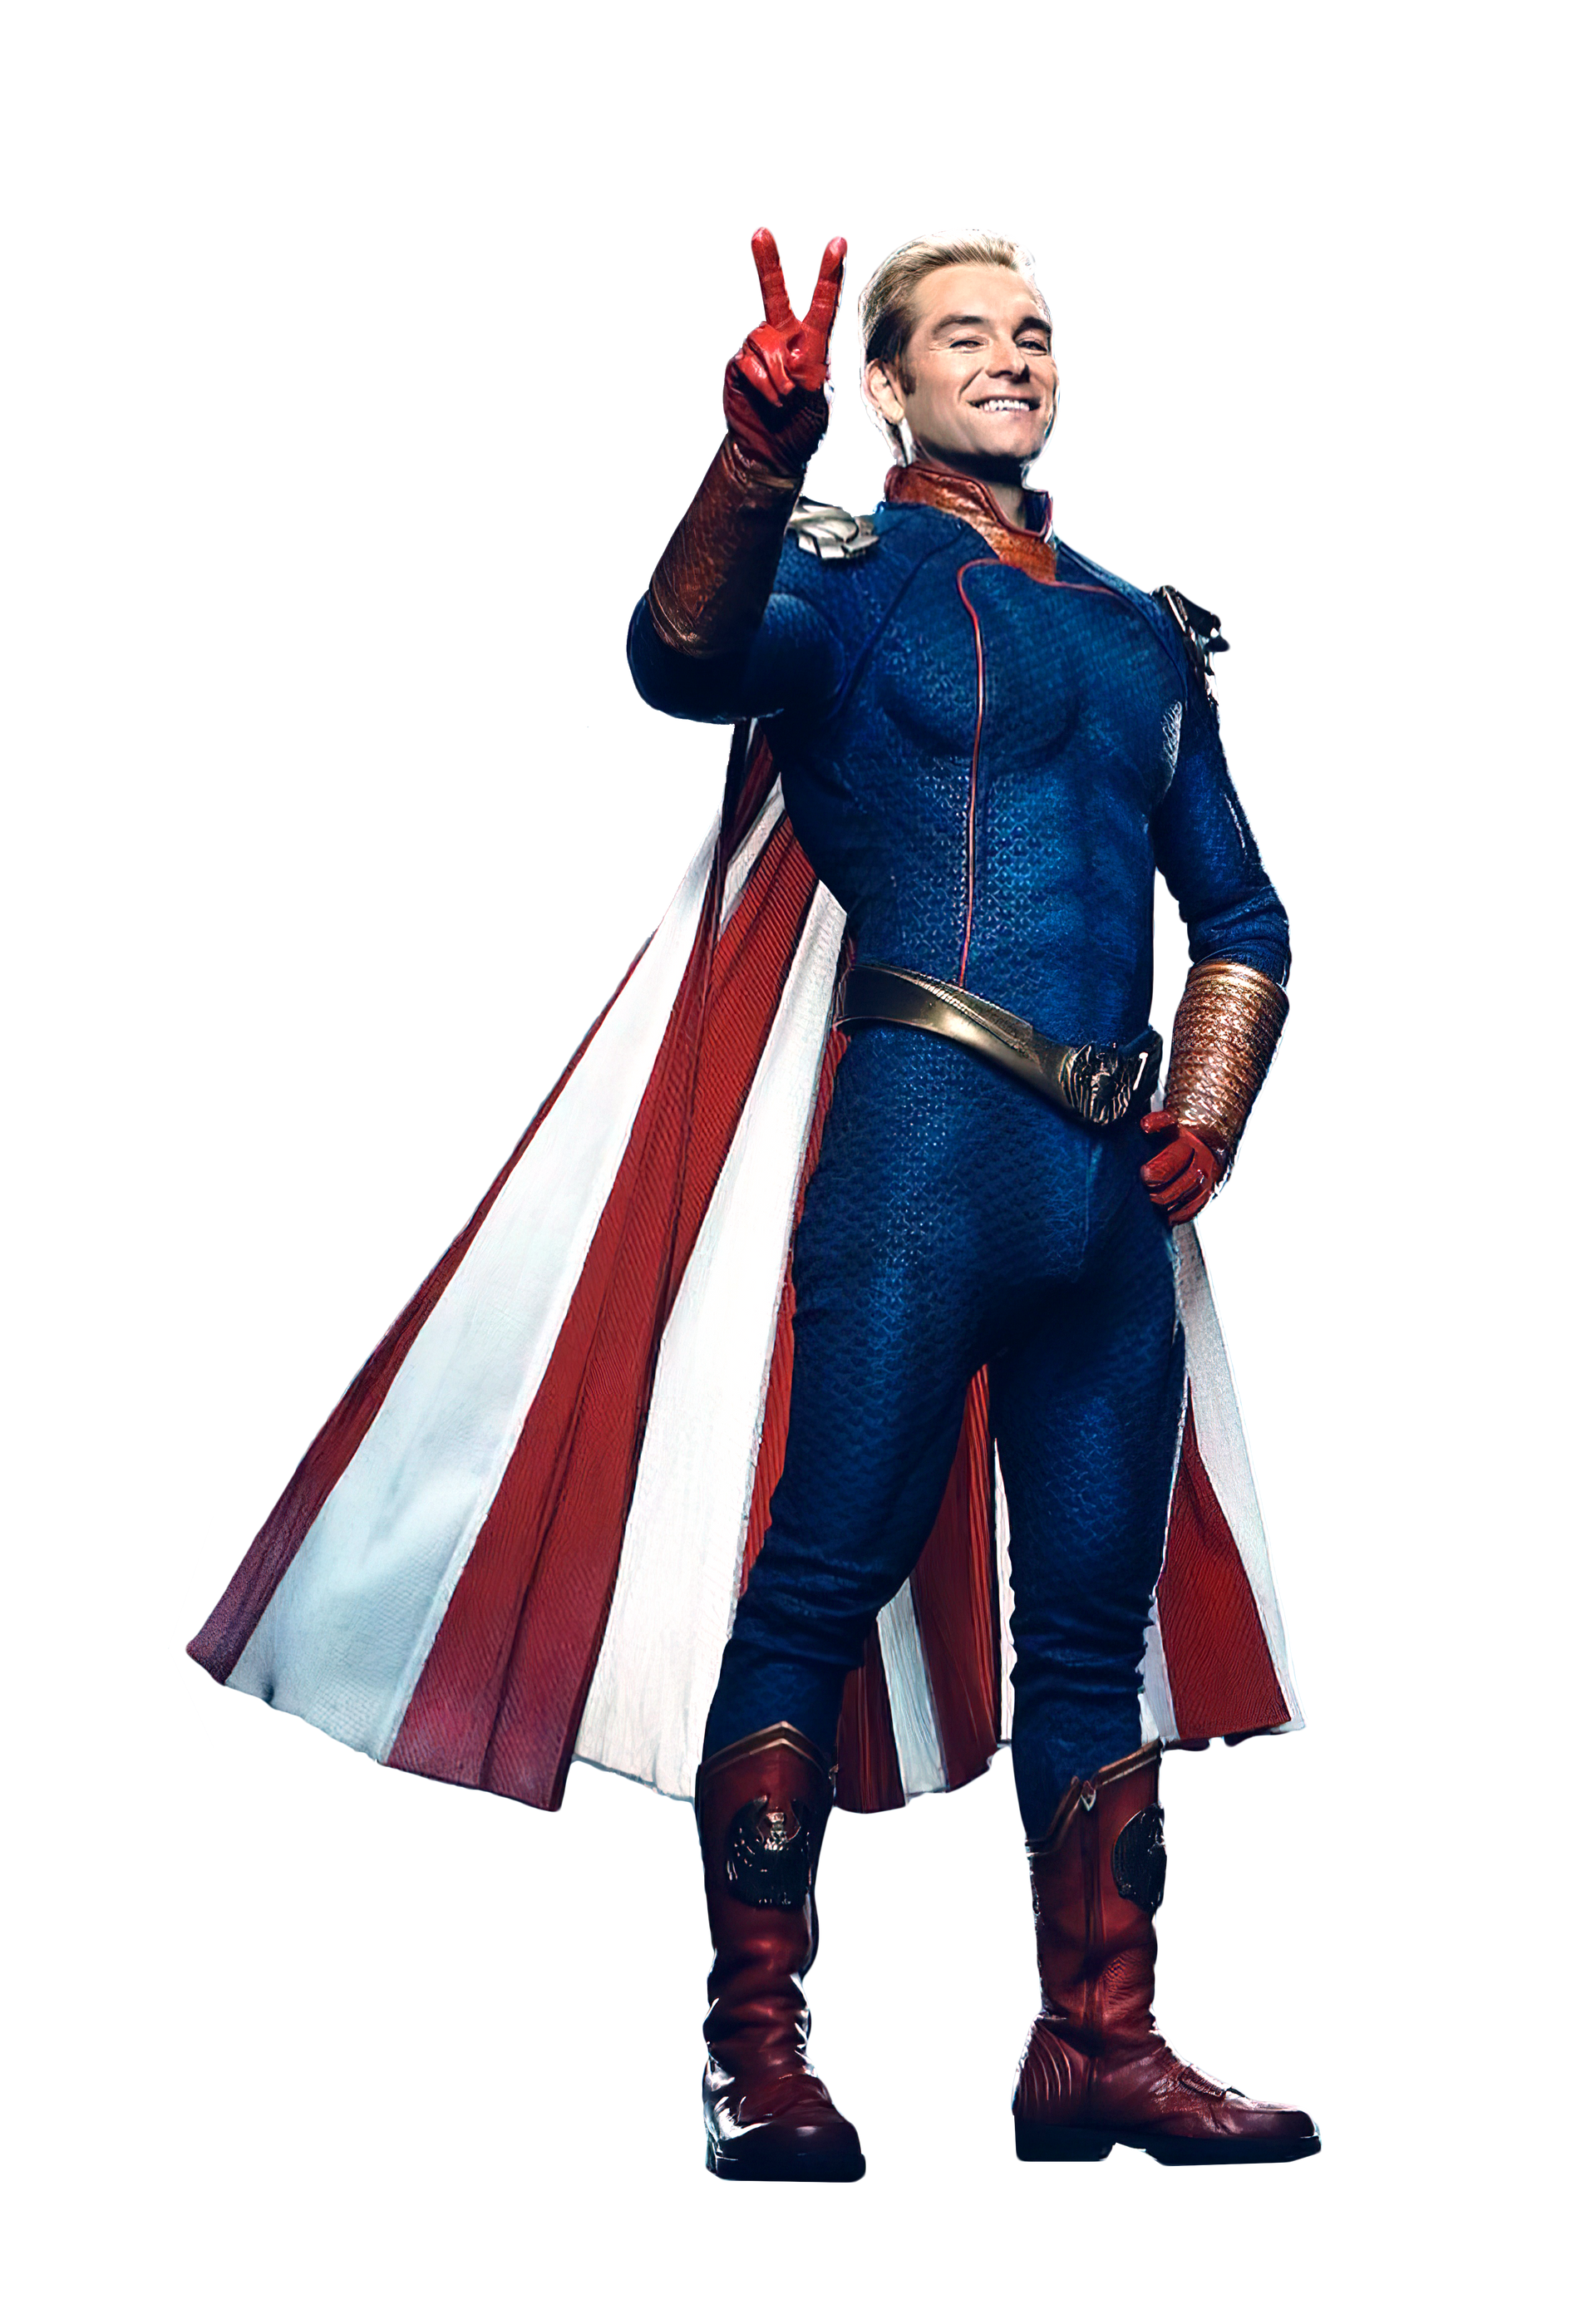 homelander__the_boys_png_by_iwasboredsoididthis_de7pzgs-fullview.png